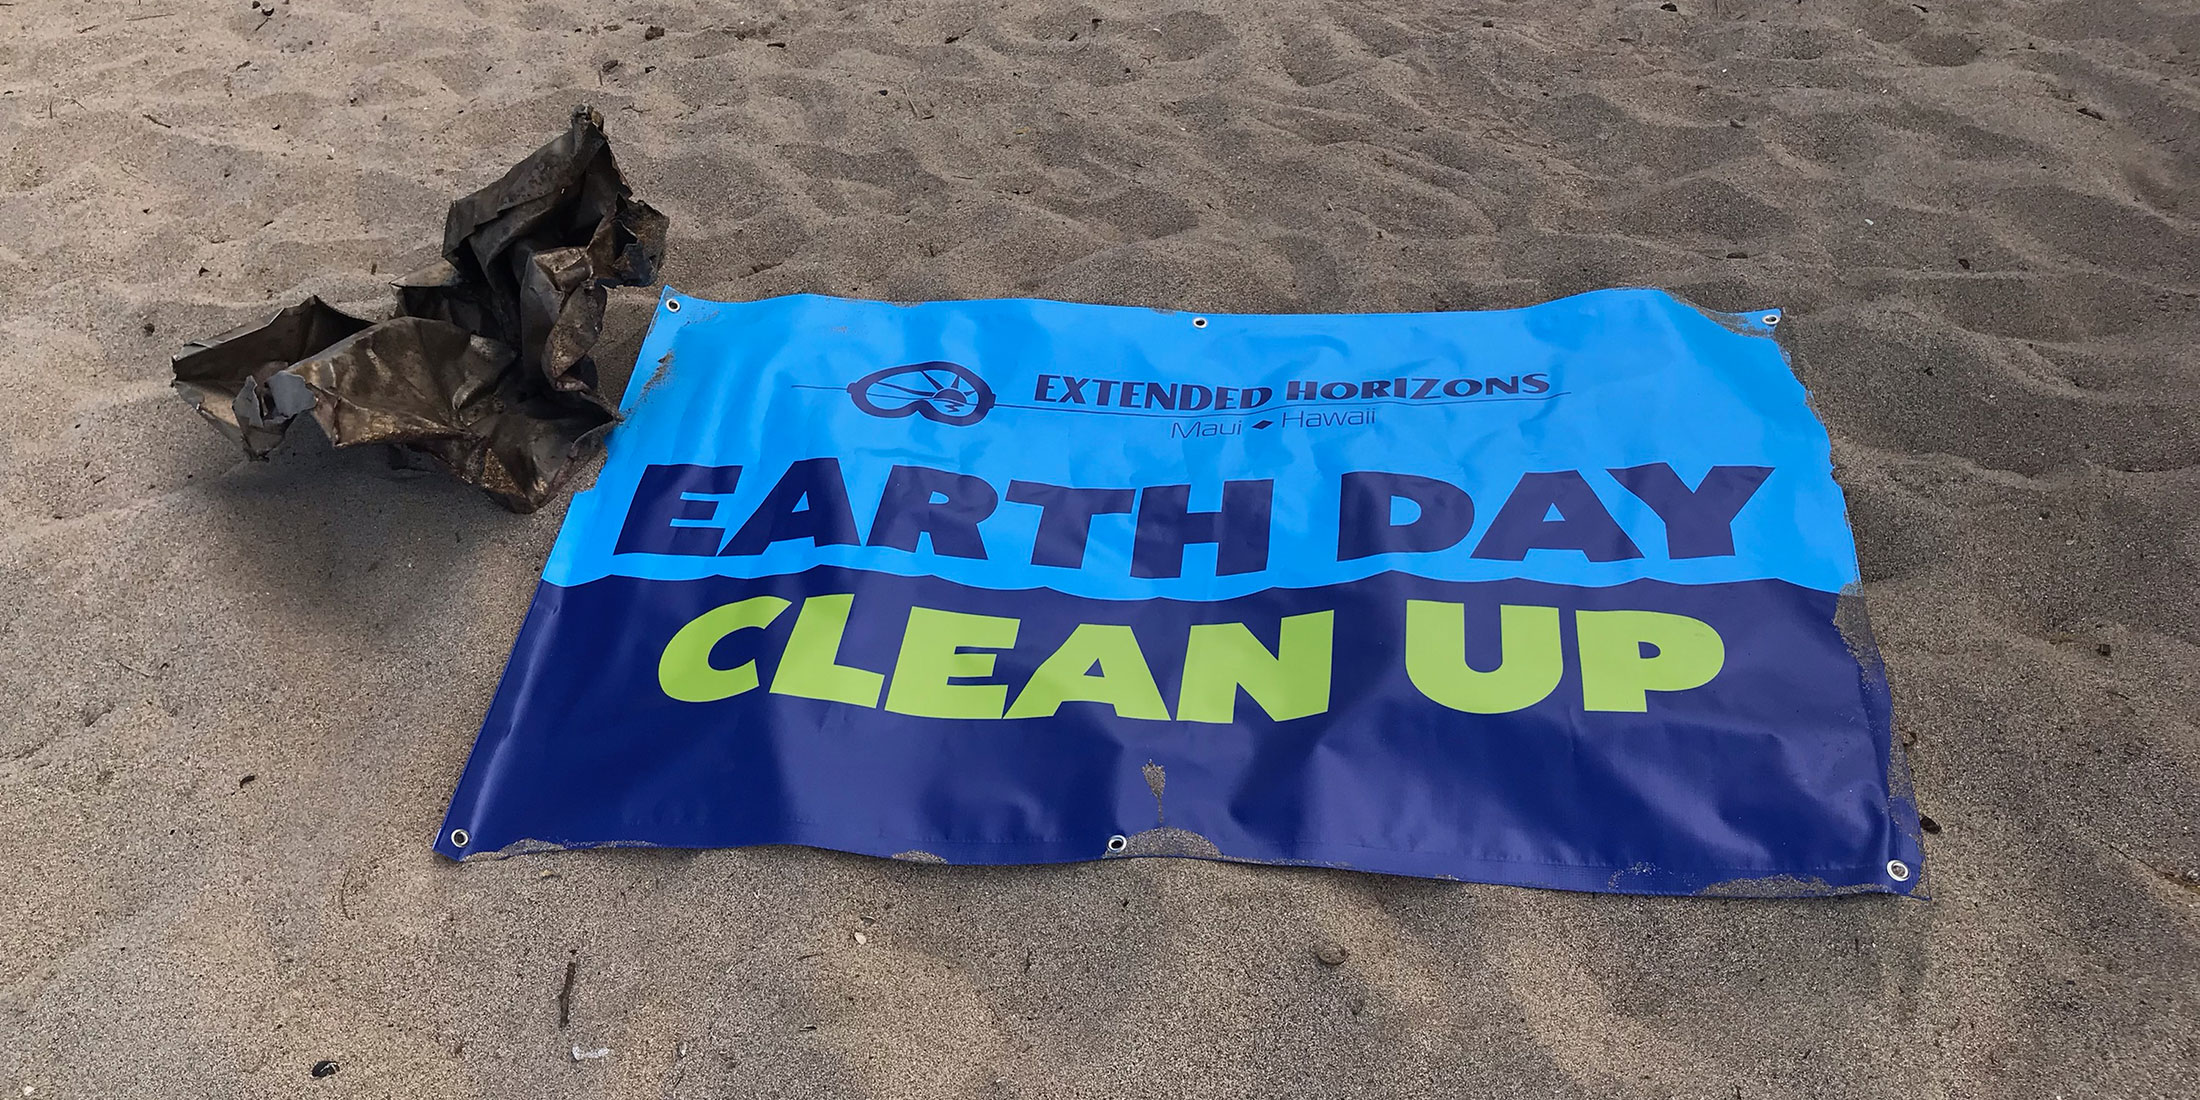 EARTH DAY EVENTS Lanai Divers